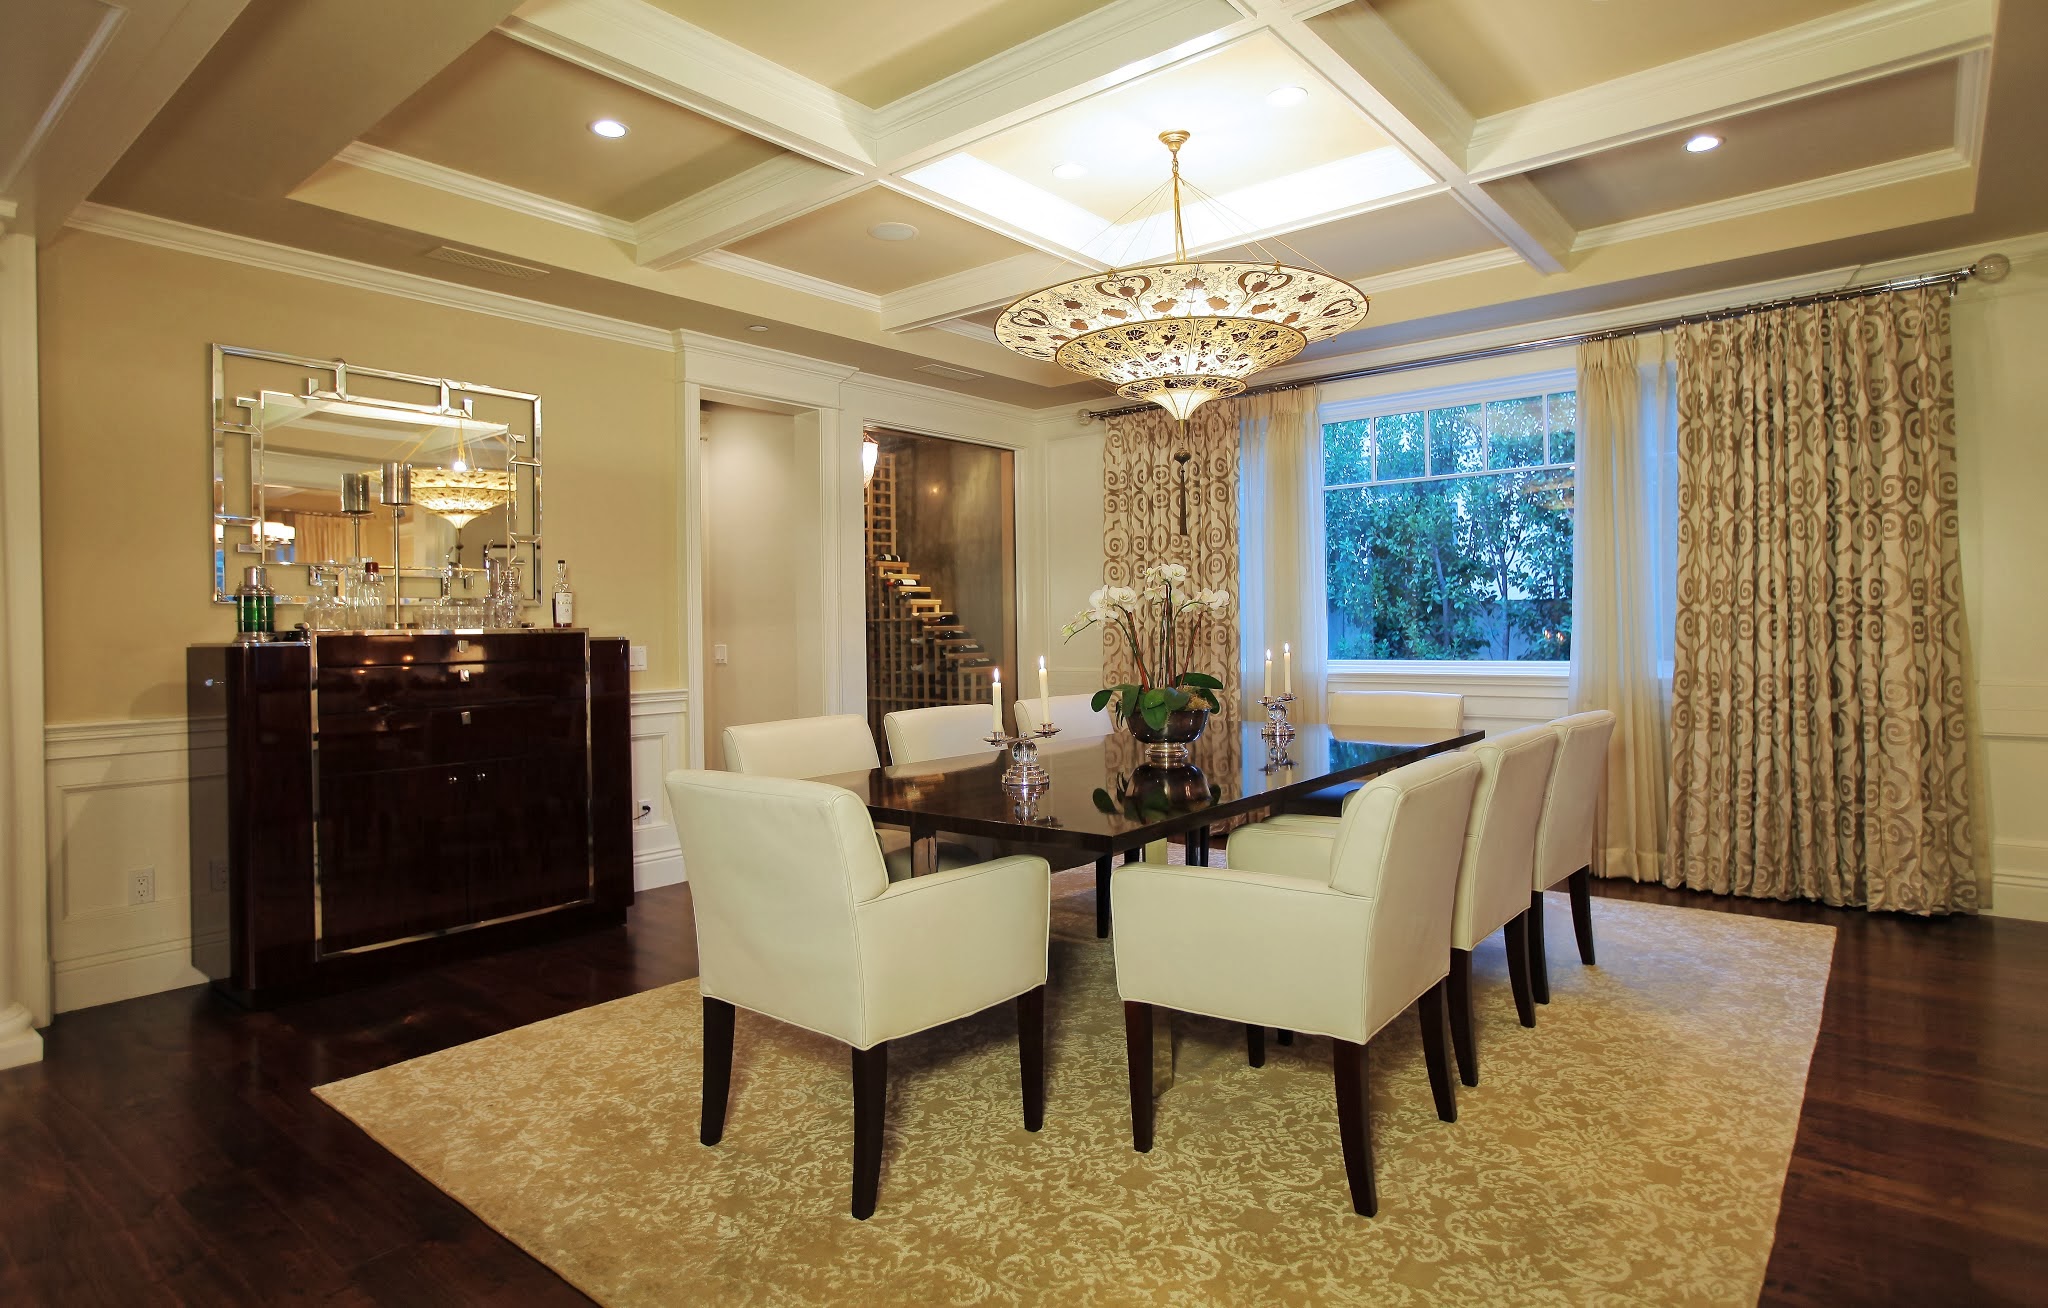 Dining Room With Column Ceiling Ideas Miami